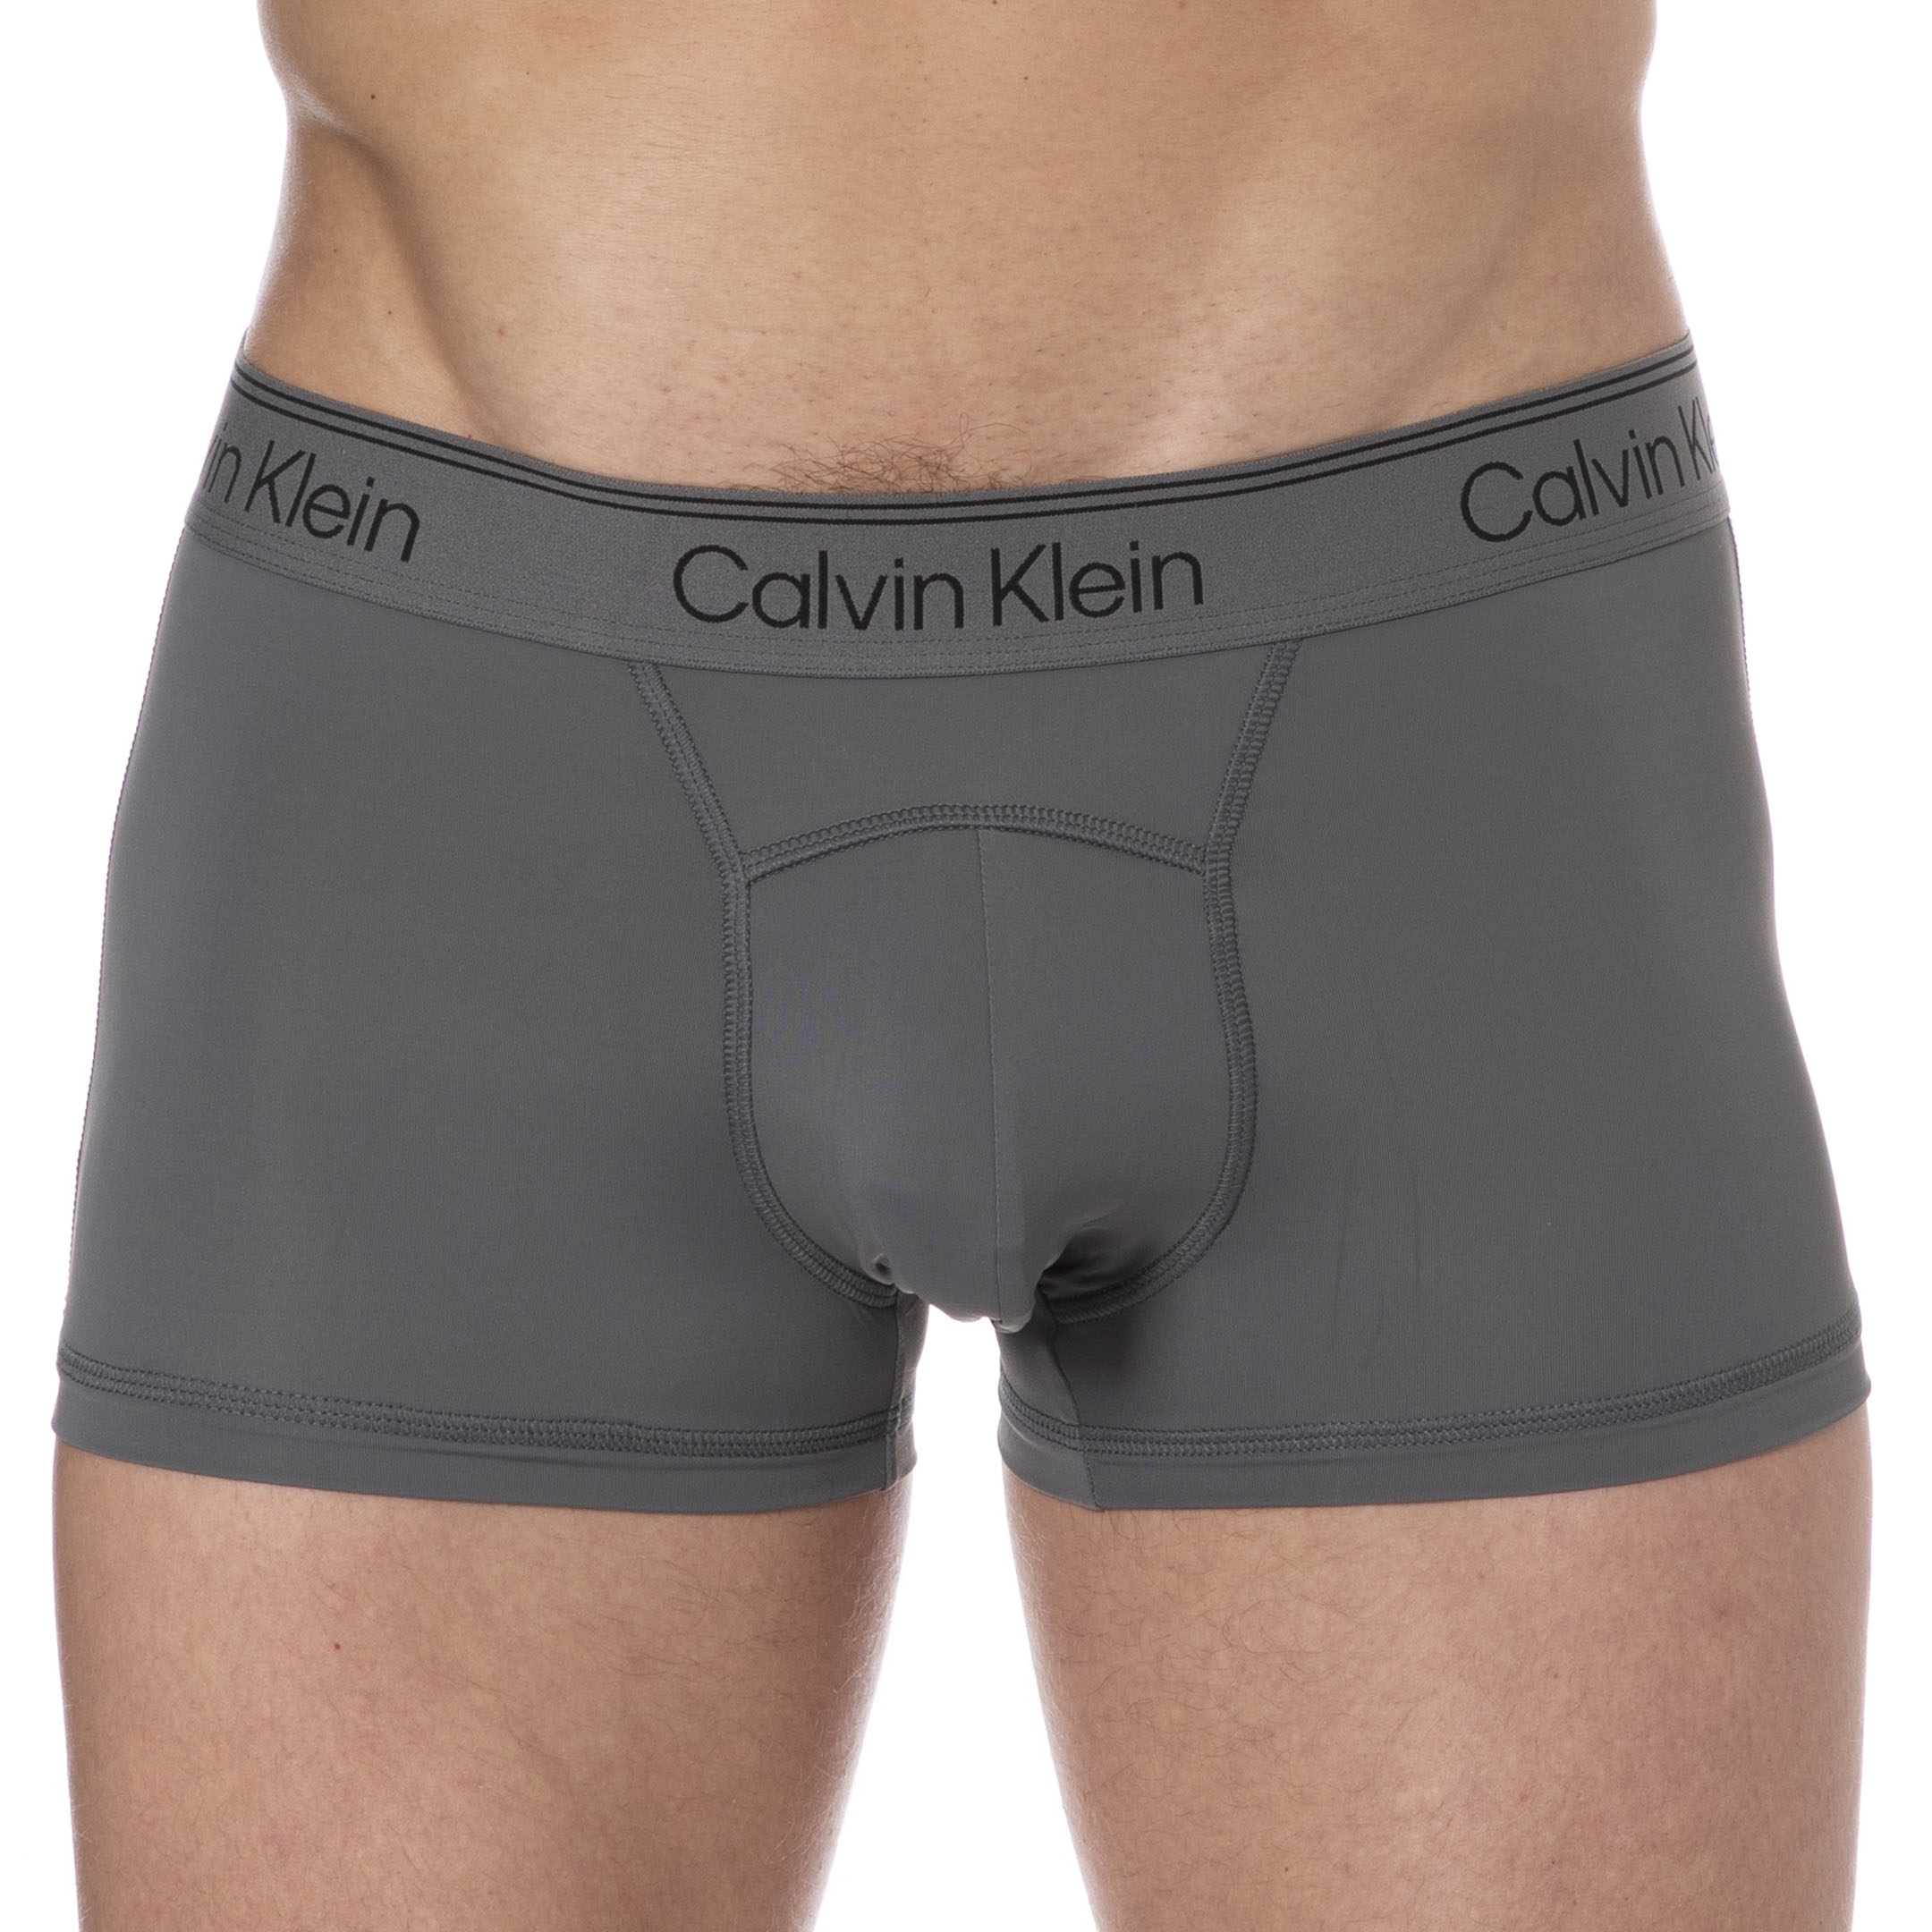 Calvin Klein Athletic Micro Trunks - Charcoal | INDERWEAR